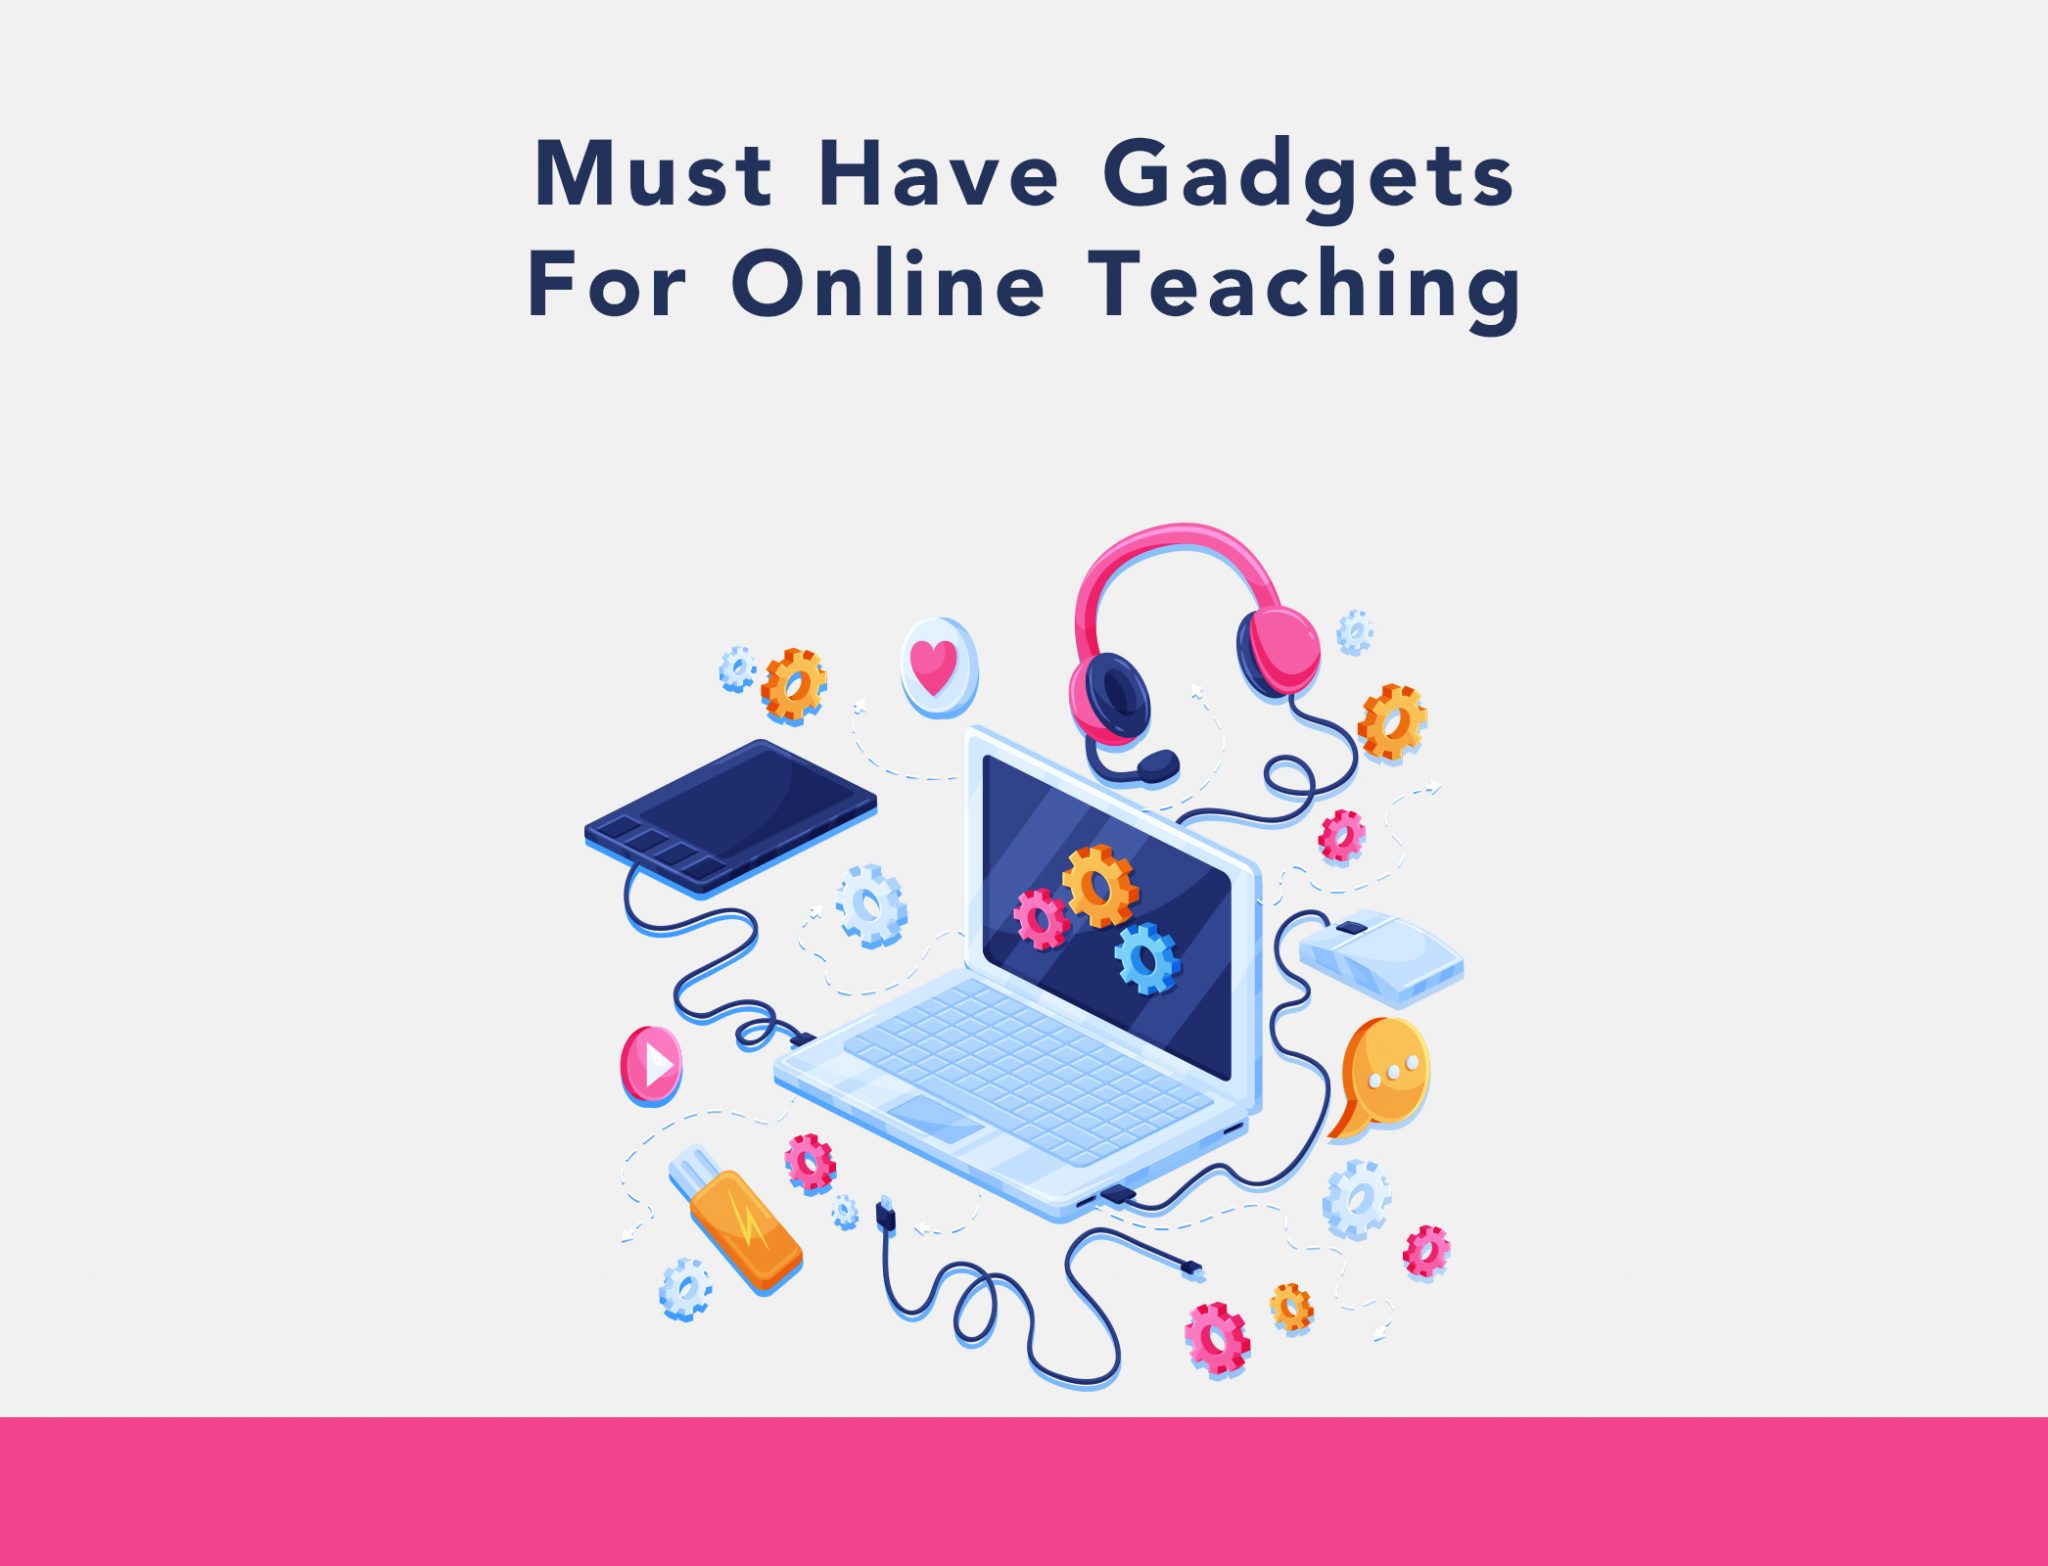 gadget using for online learning essay